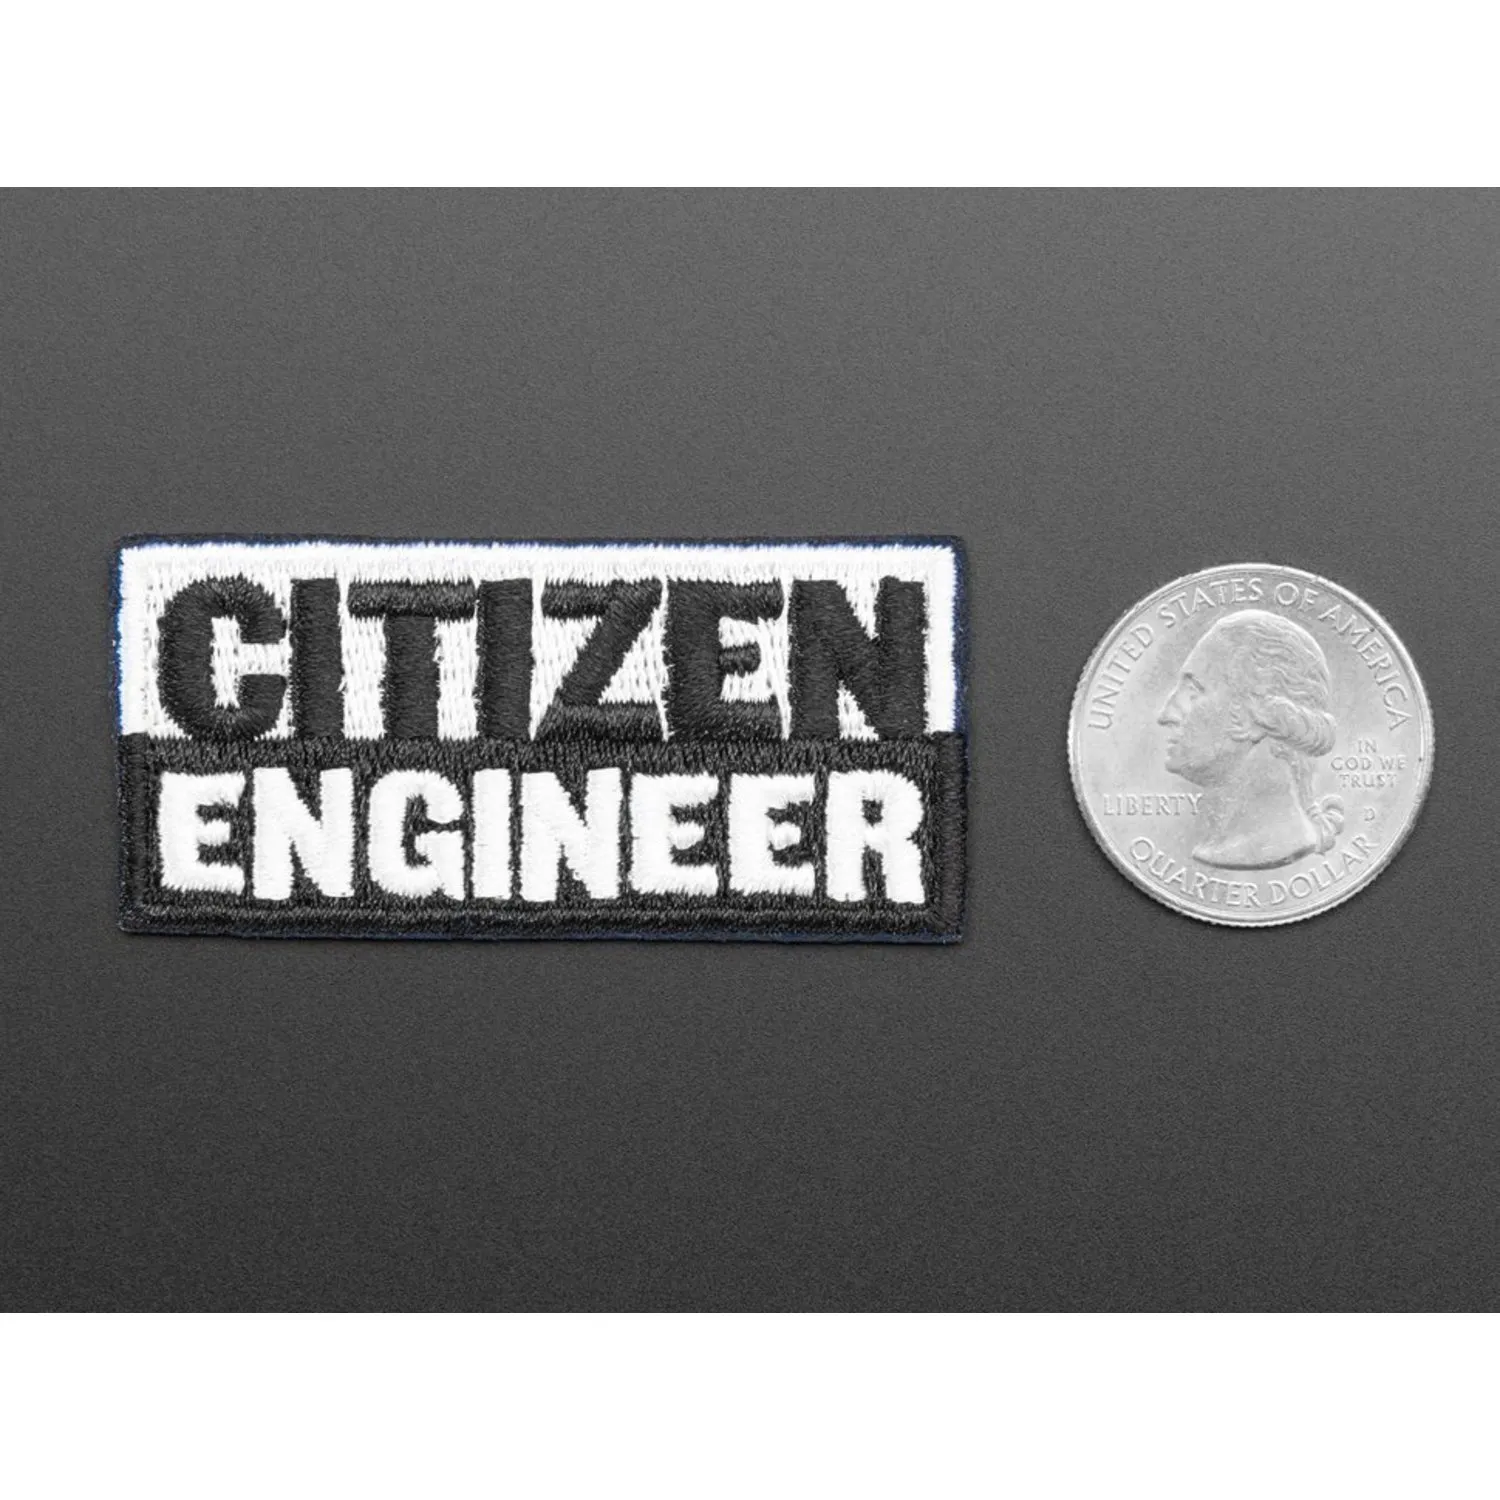 Photo of Citizen Engineer - Skill badge, iron-on patch